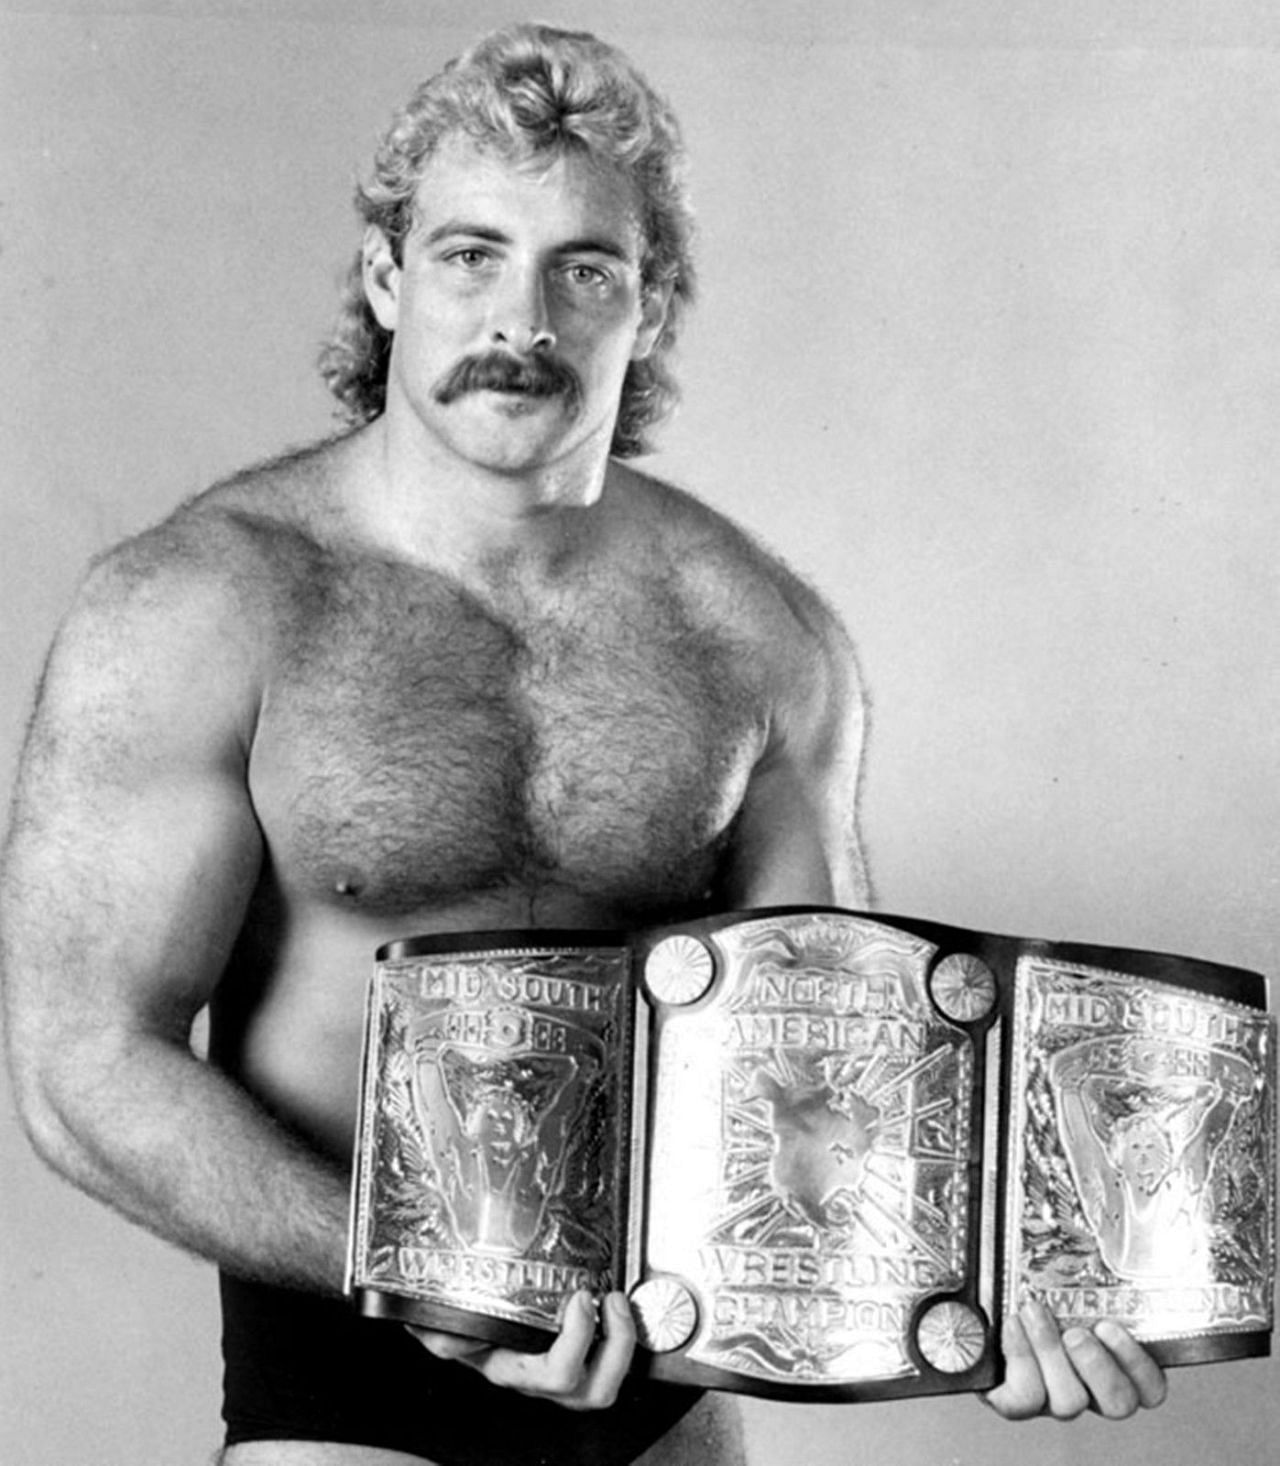 Magnum T.A. held the US Championship for almost a year across 2 reigns